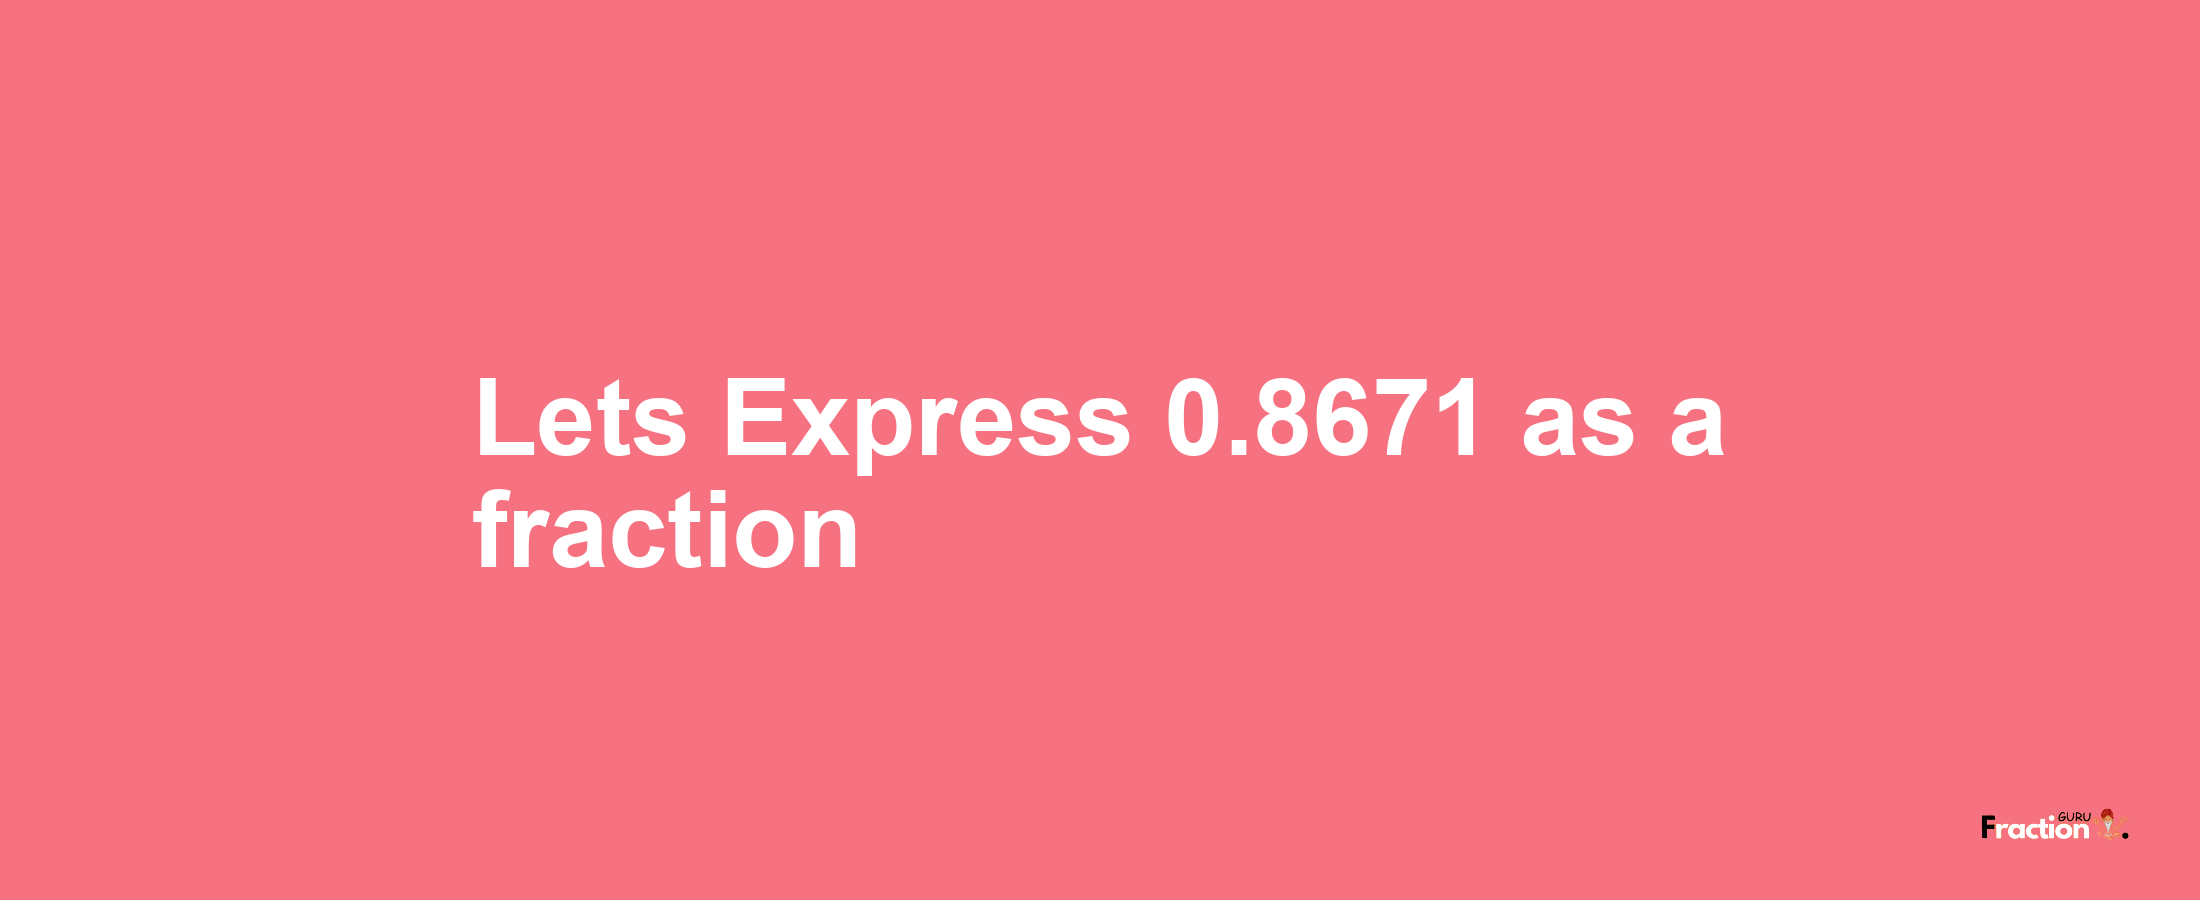 Lets Express 0.8671 as afraction